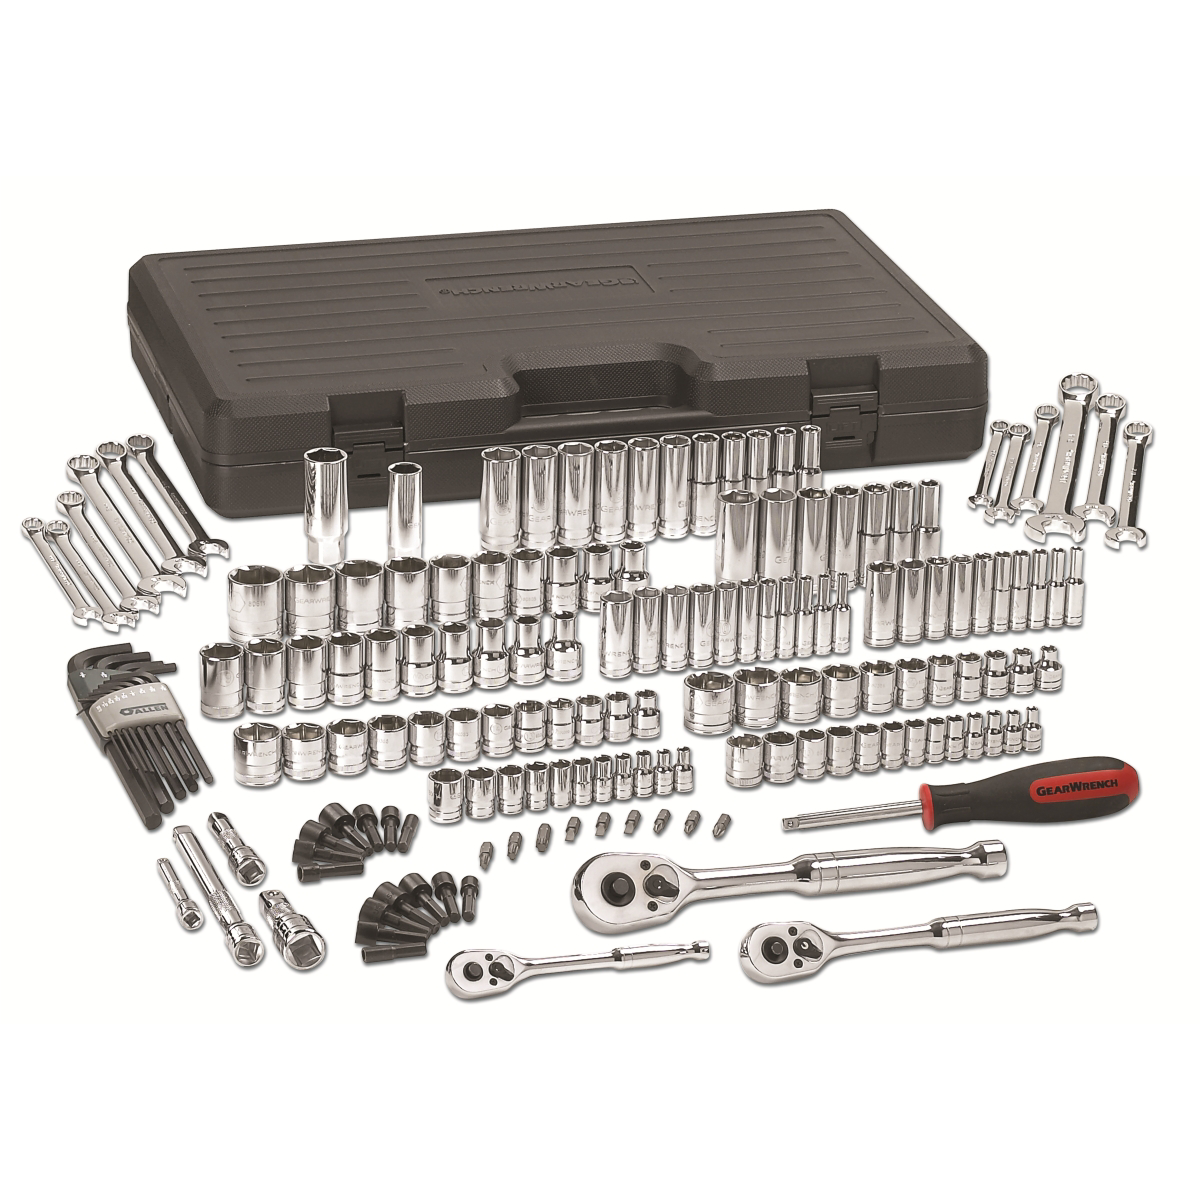 GearWrench 165 PC 1/4" 3/8" & 1/2" DR MECHANICS TOOLS SET - image 1 of 6